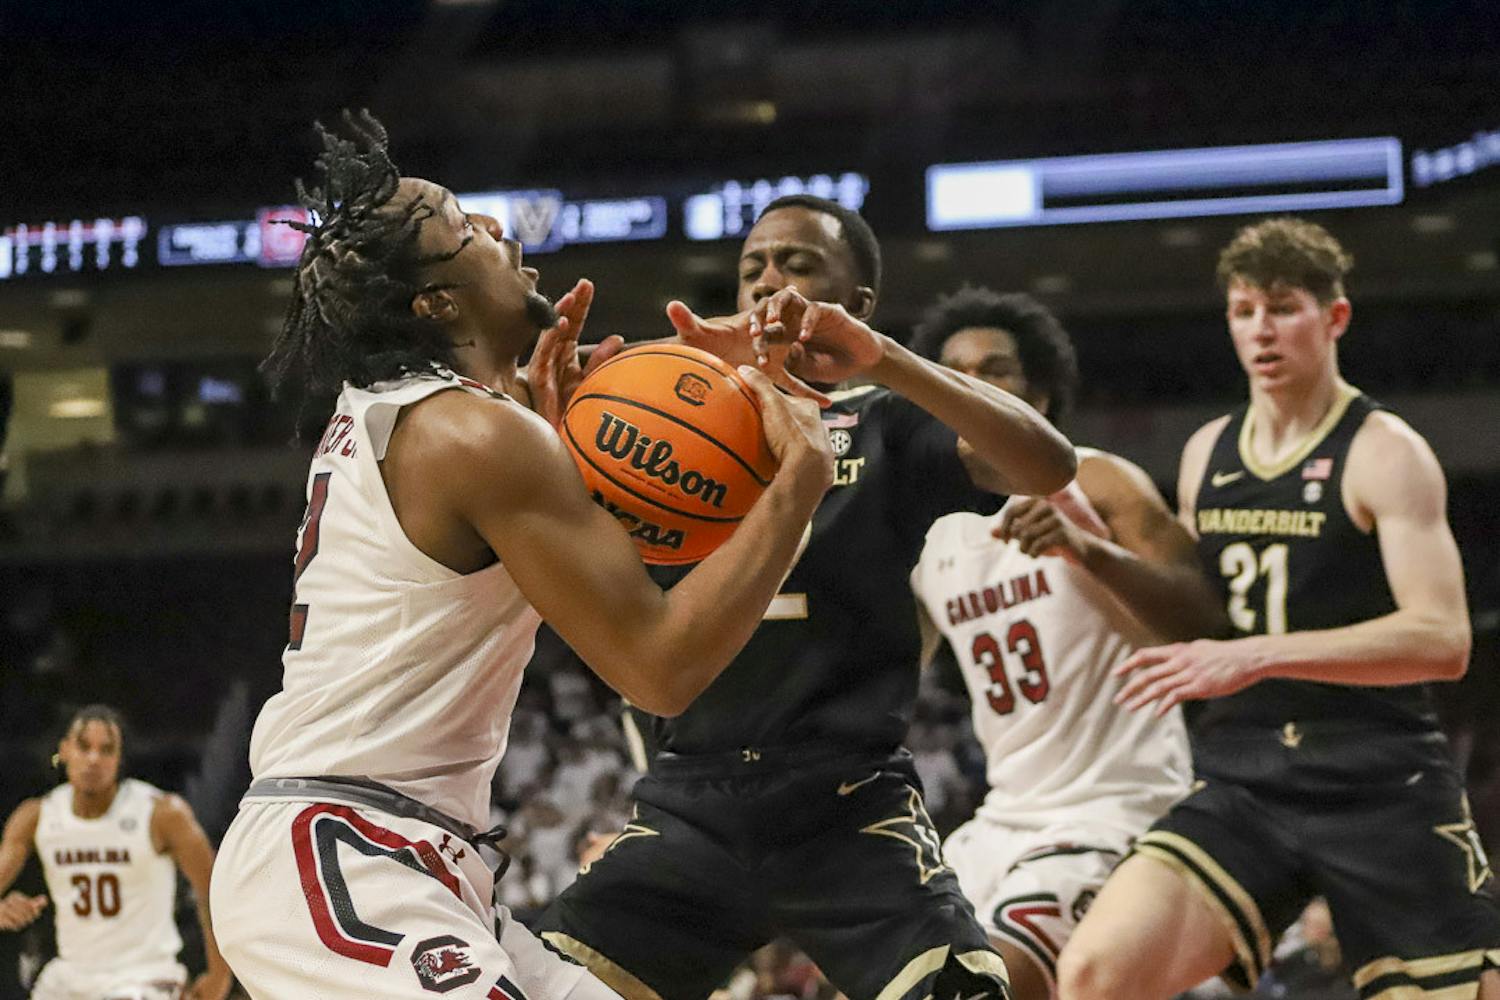 South Carolina couldn't keep up with Vanderbilt's offense during their matchup at Colonial Life Arena on Feb. 14, 2023. Both teams struggled to maintain a strong shooting game, scoring less than 40% of their field goals and 30% of their three-point shots. The Commodores beat the Gamecocks 75-64, marking this the team's seventh consecutive loss and placing them 2-11 in the SEC.&nbsp;